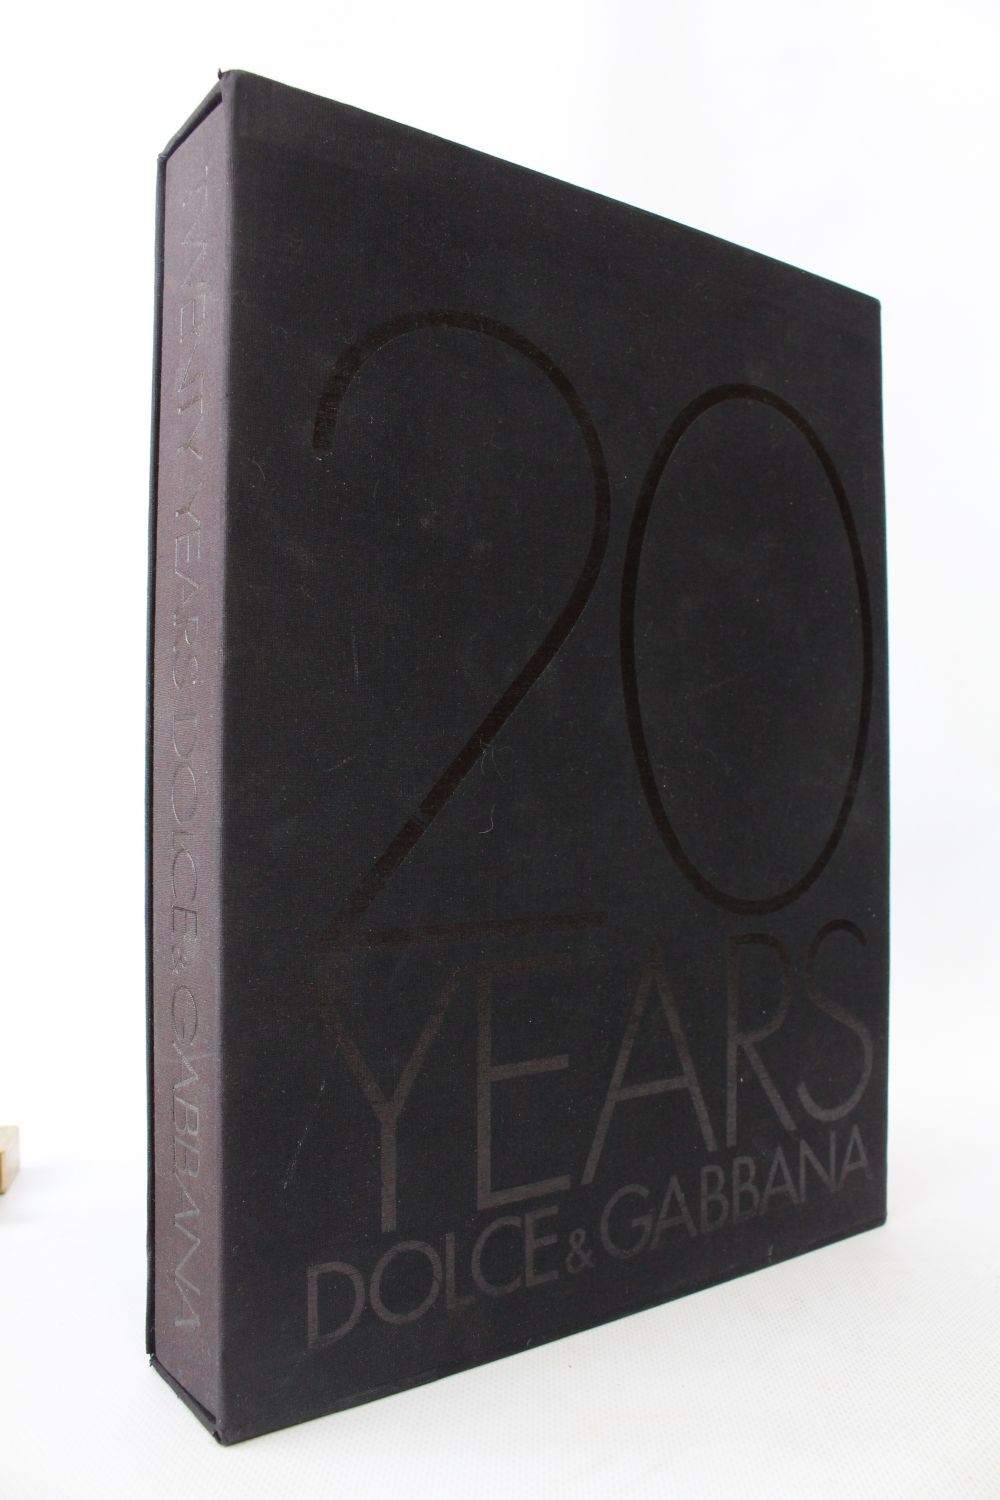 DOLCE : 20 years. Dolce & Gabbana - Signed book, First edition -  